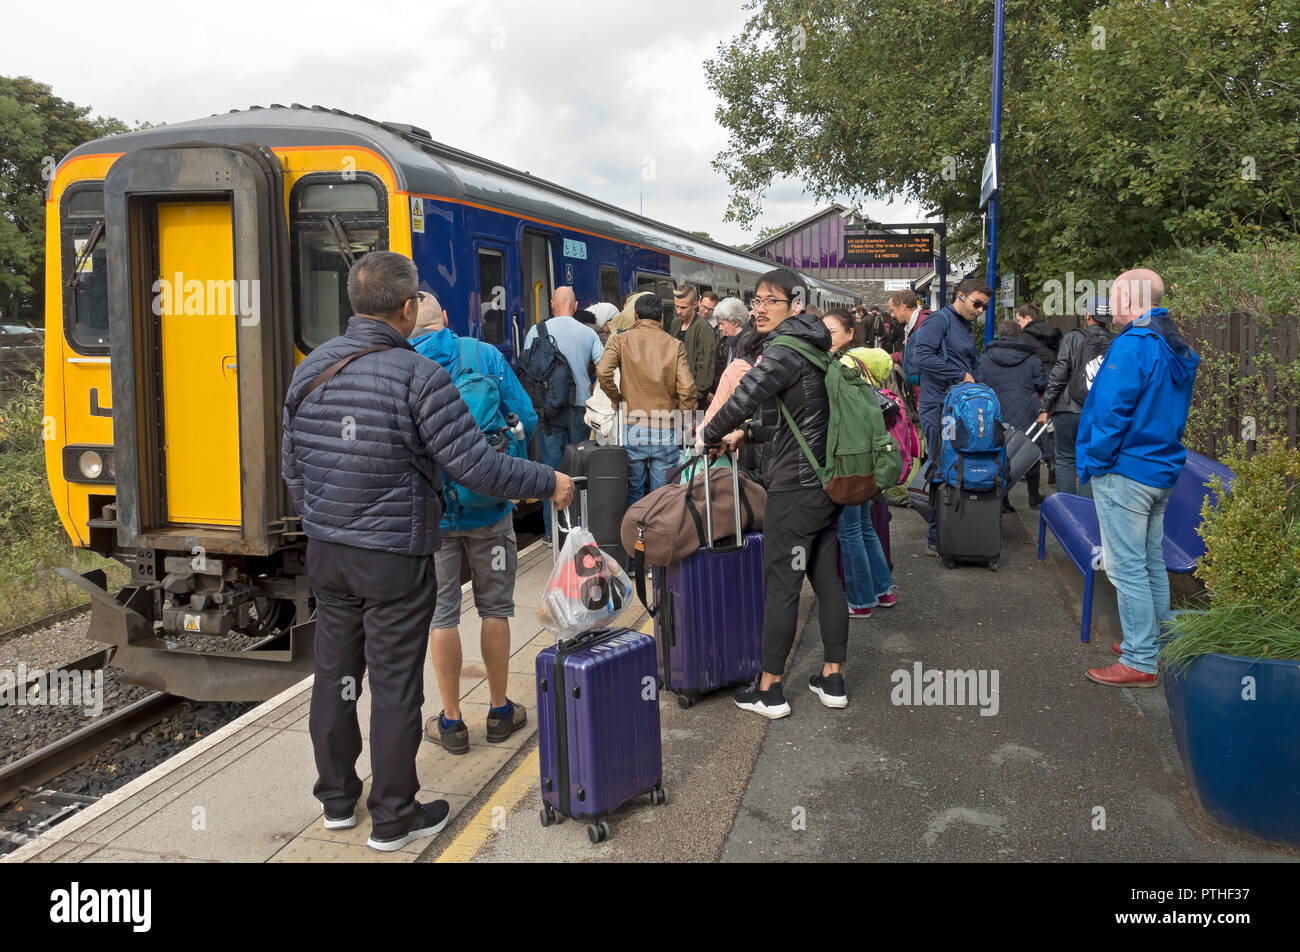 Passengers people tourists boarding getting on board Northern train at Windermere Railway Station Cumbria England UK United Kingdom GB Great Britain Stock Photo